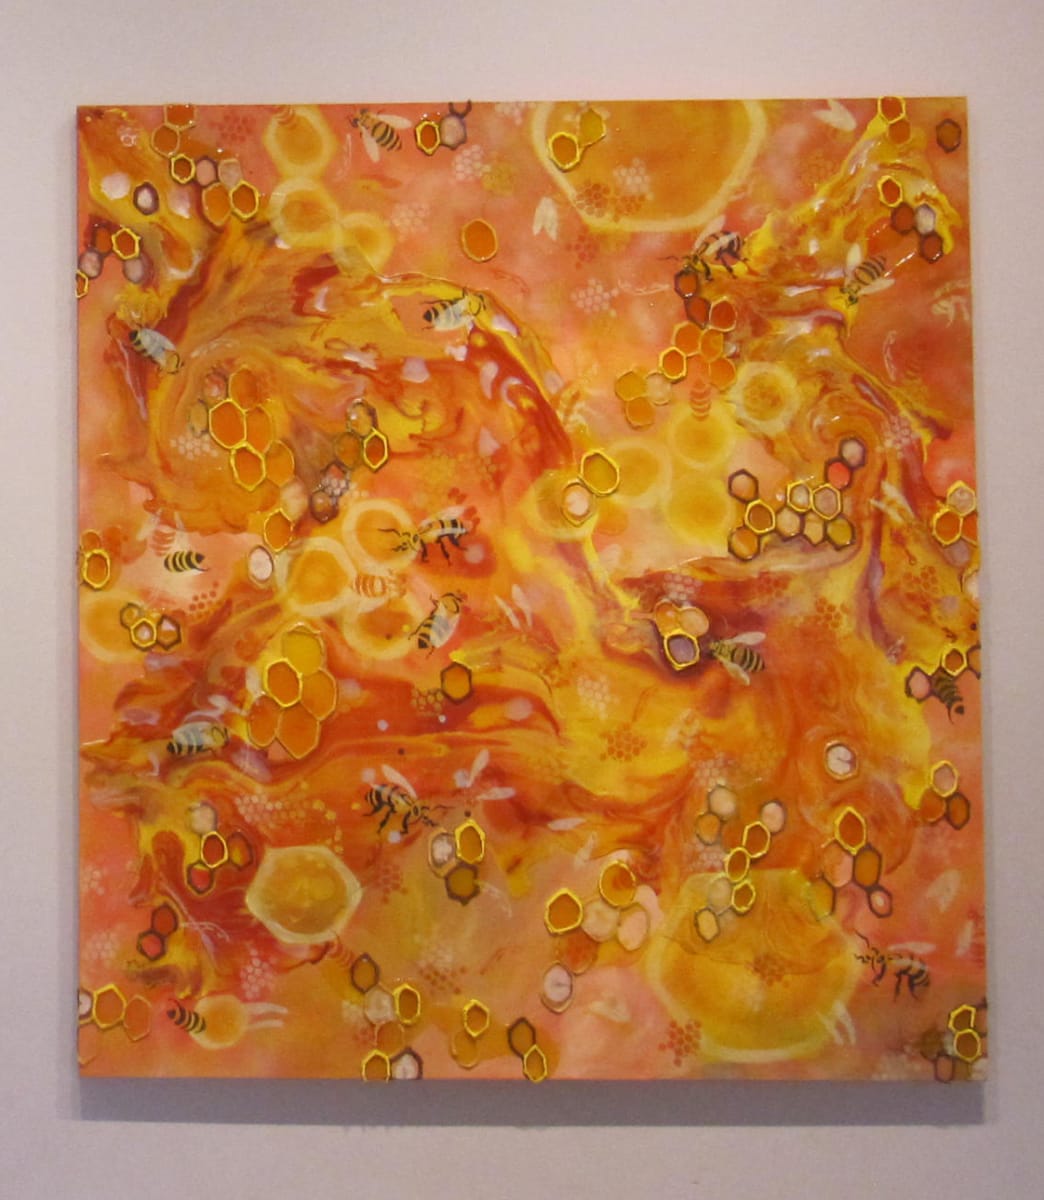 Hive Mentality by Anne KM Ross  Image: Hive Mentality 66" x 72" Acrylic on canvas 